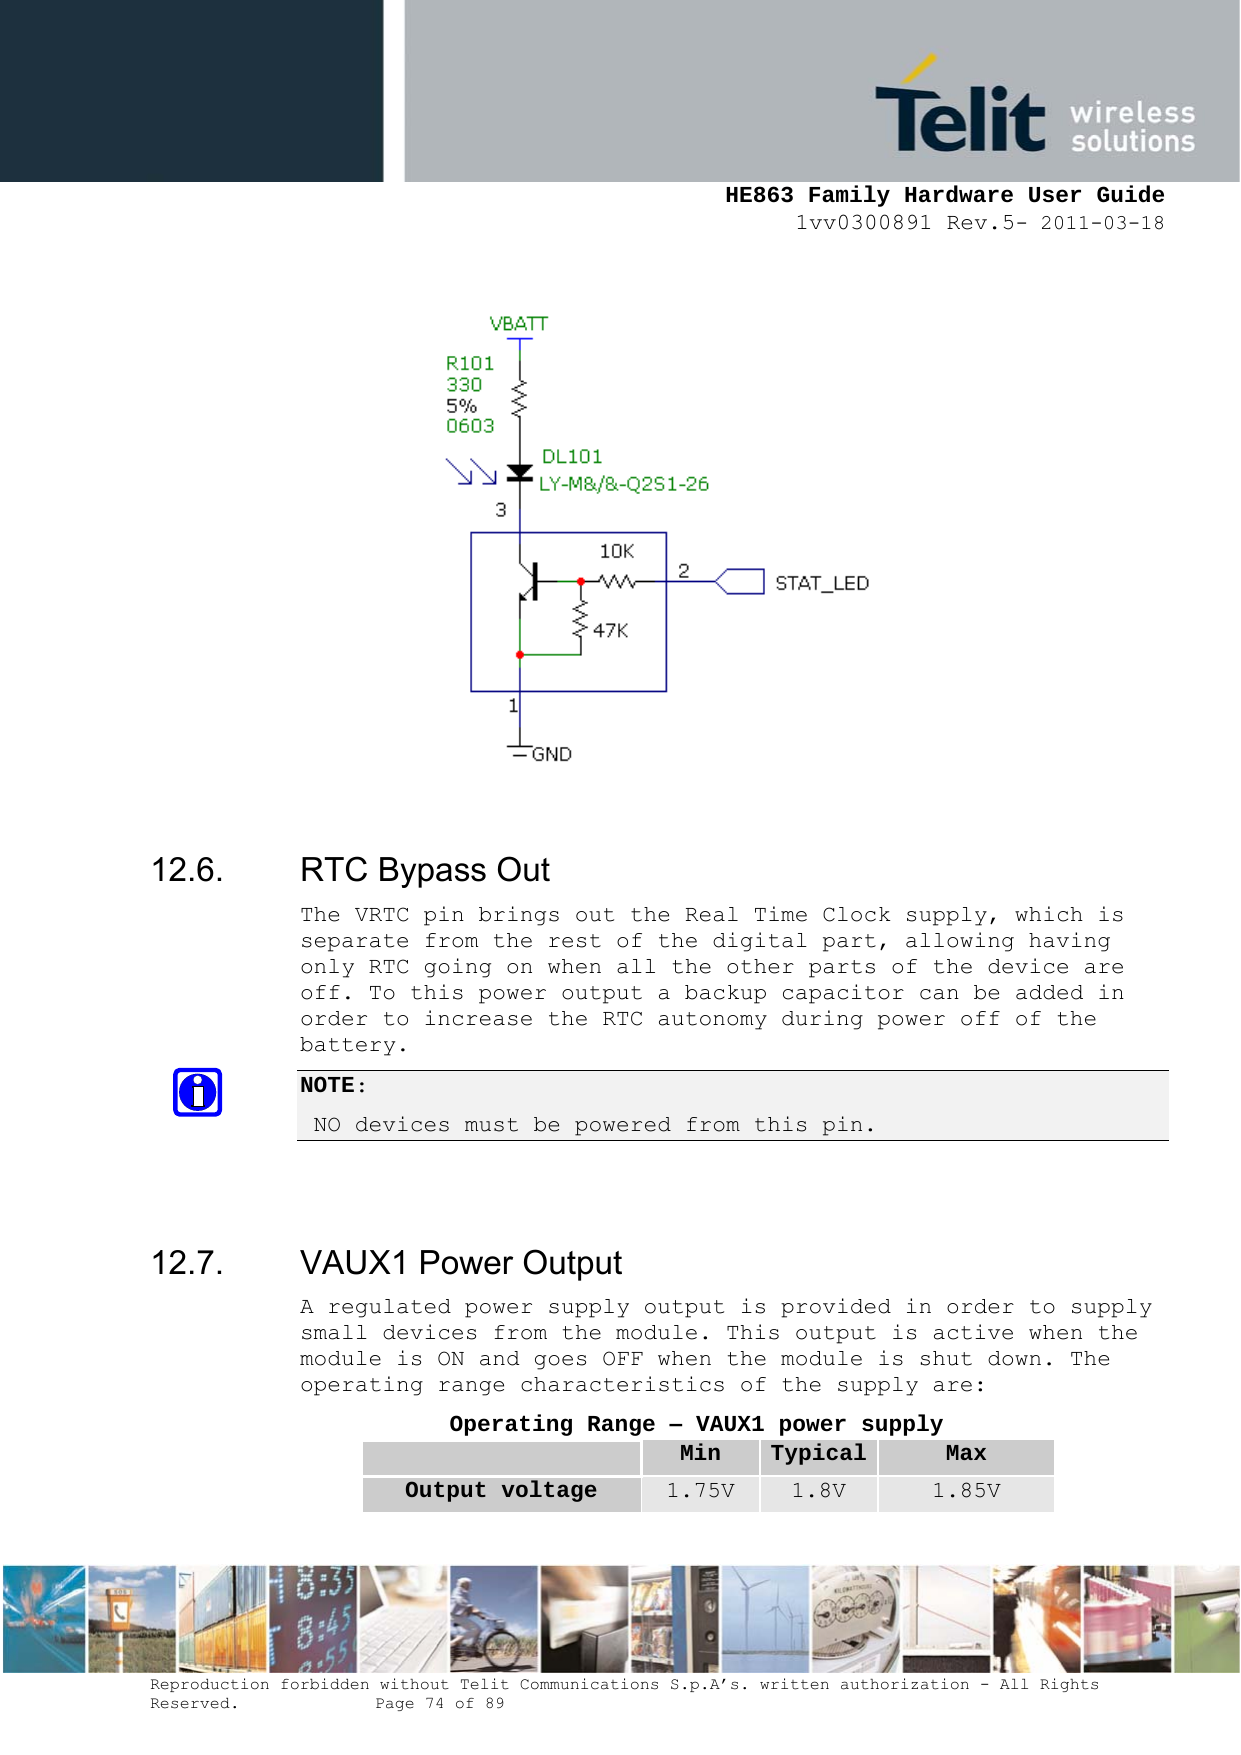     HE863 Family Hardware User Guide 1vv0300891 Rev.5- 2011-03-18    Reproduction forbidden without Telit Communications S.p.A’s. written authorization - All Rights Reserved.    Page 74 of 89                 12.6.  RTC Bypass Out The VRTC pin brings out the Real Time Clock supply, which is separate from the rest of the digital part, allowing having only RTC going on when all the other parts of the device are off. To this power output a backup capacitor can be added in order to increase the RTC autonomy during power off of the battery.  NOTE:  NO devices must be powered from this pin.   12.7.  VAUX1 Power Output A regulated power supply output is provided in order to supply small devices from the module. This output is active when the module is ON and goes OFF when the module is shut down. The operating range characteristics of the supply are: Operating Range – VAUX1 power supply  Min  Typical Max Output voltage  1.75V  1.8V  1.85V 